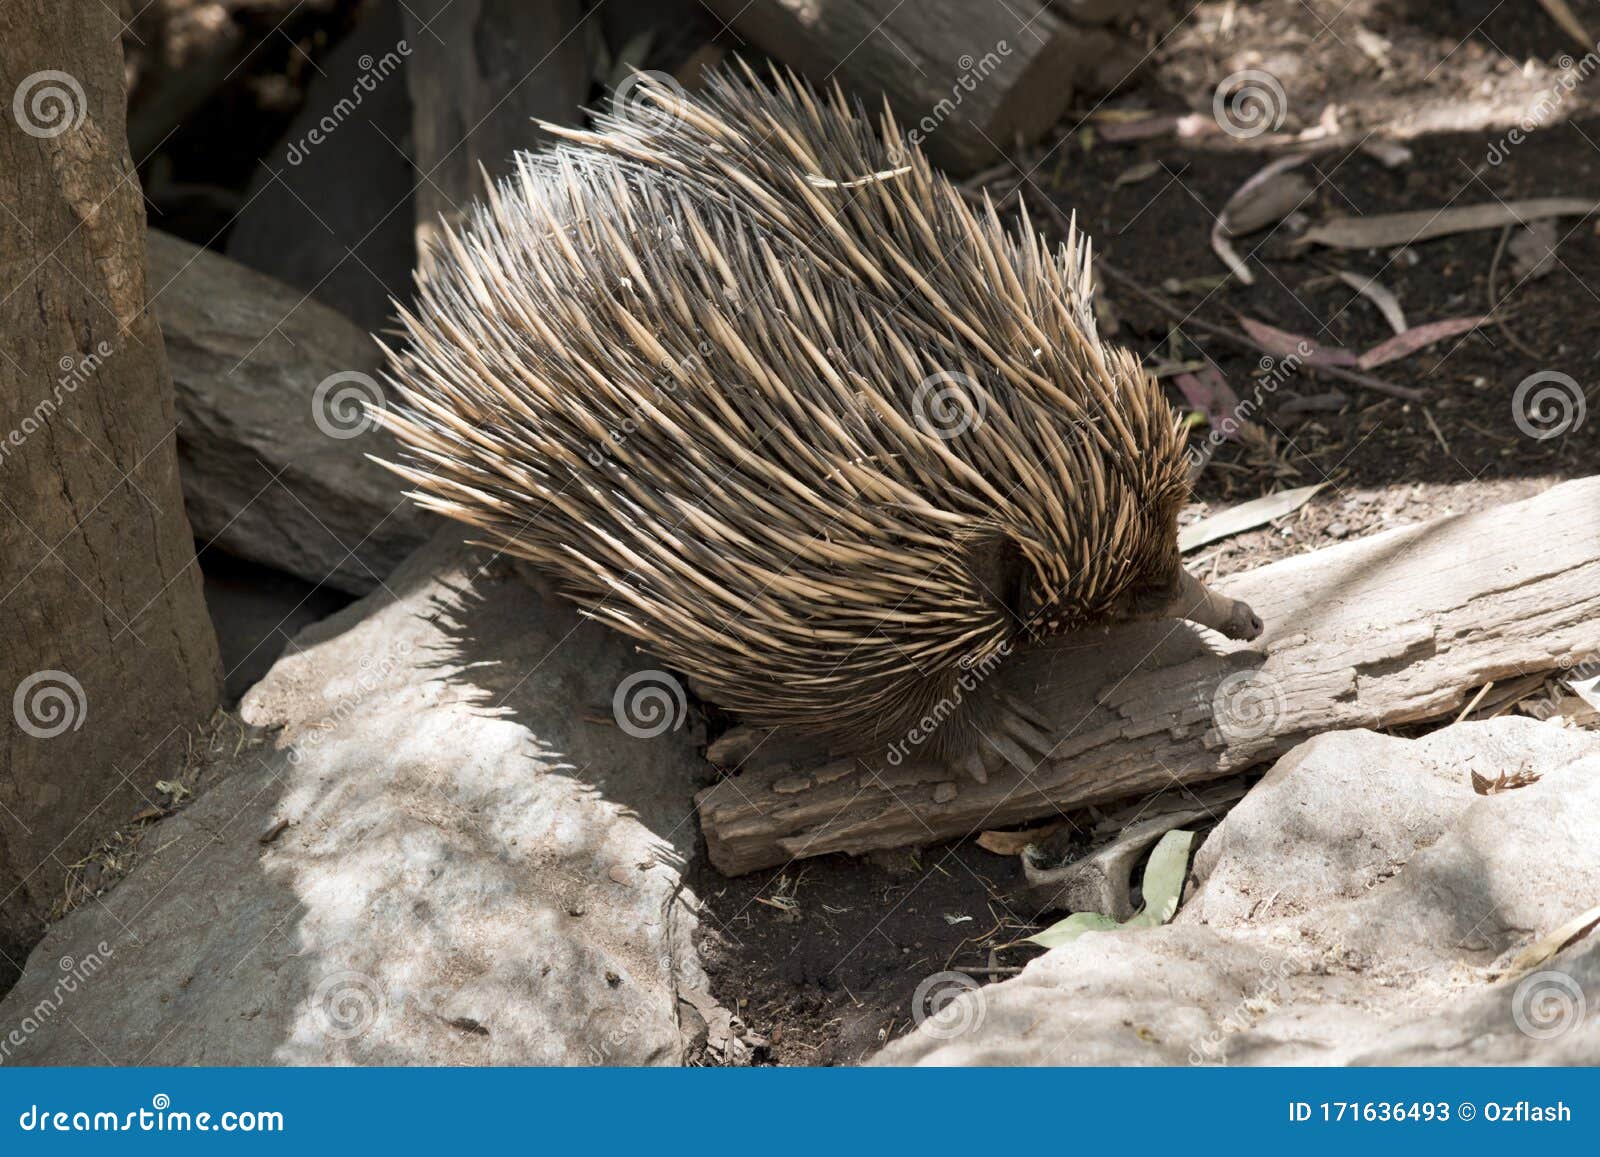 This is a Side View of an Echidna Stock Image - Image of nose, brown ...